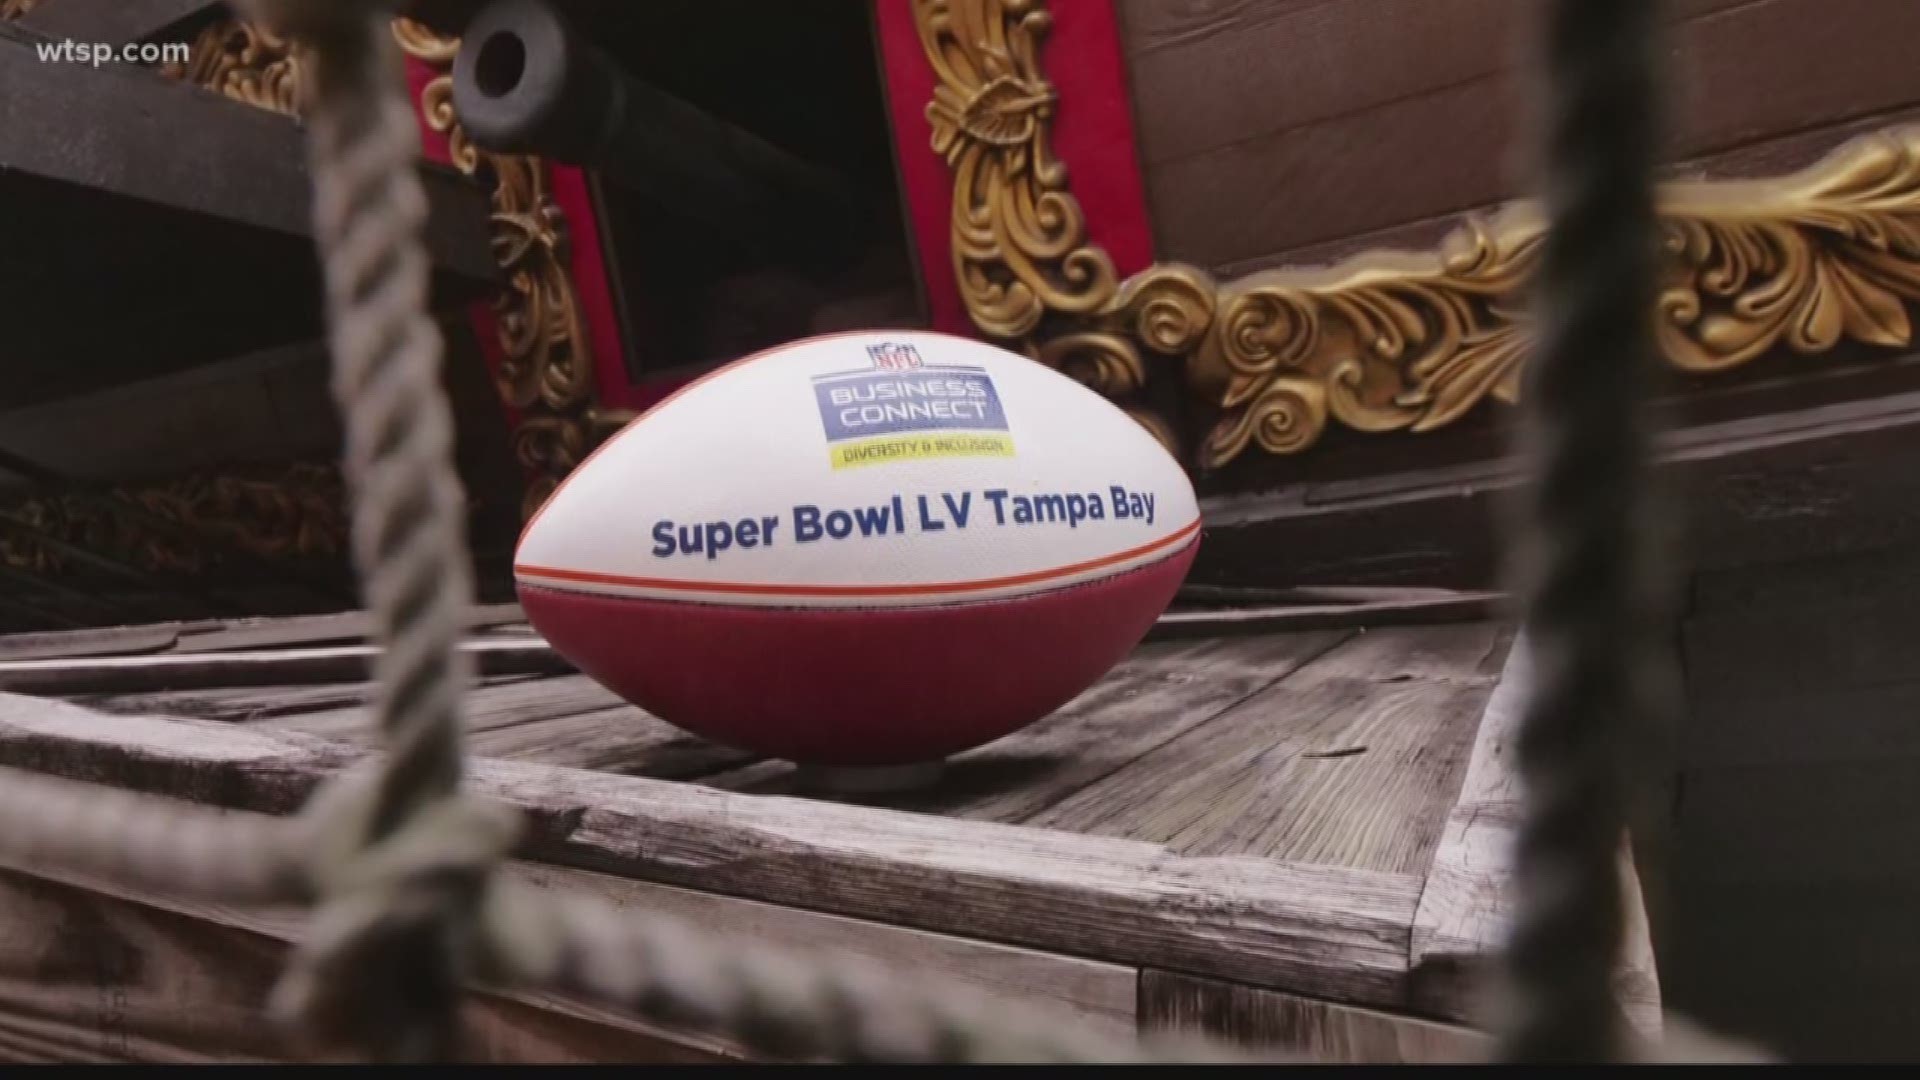 Rob Finnerty takes a look at the history of the Super Bowl taking place in Tampa Bay.